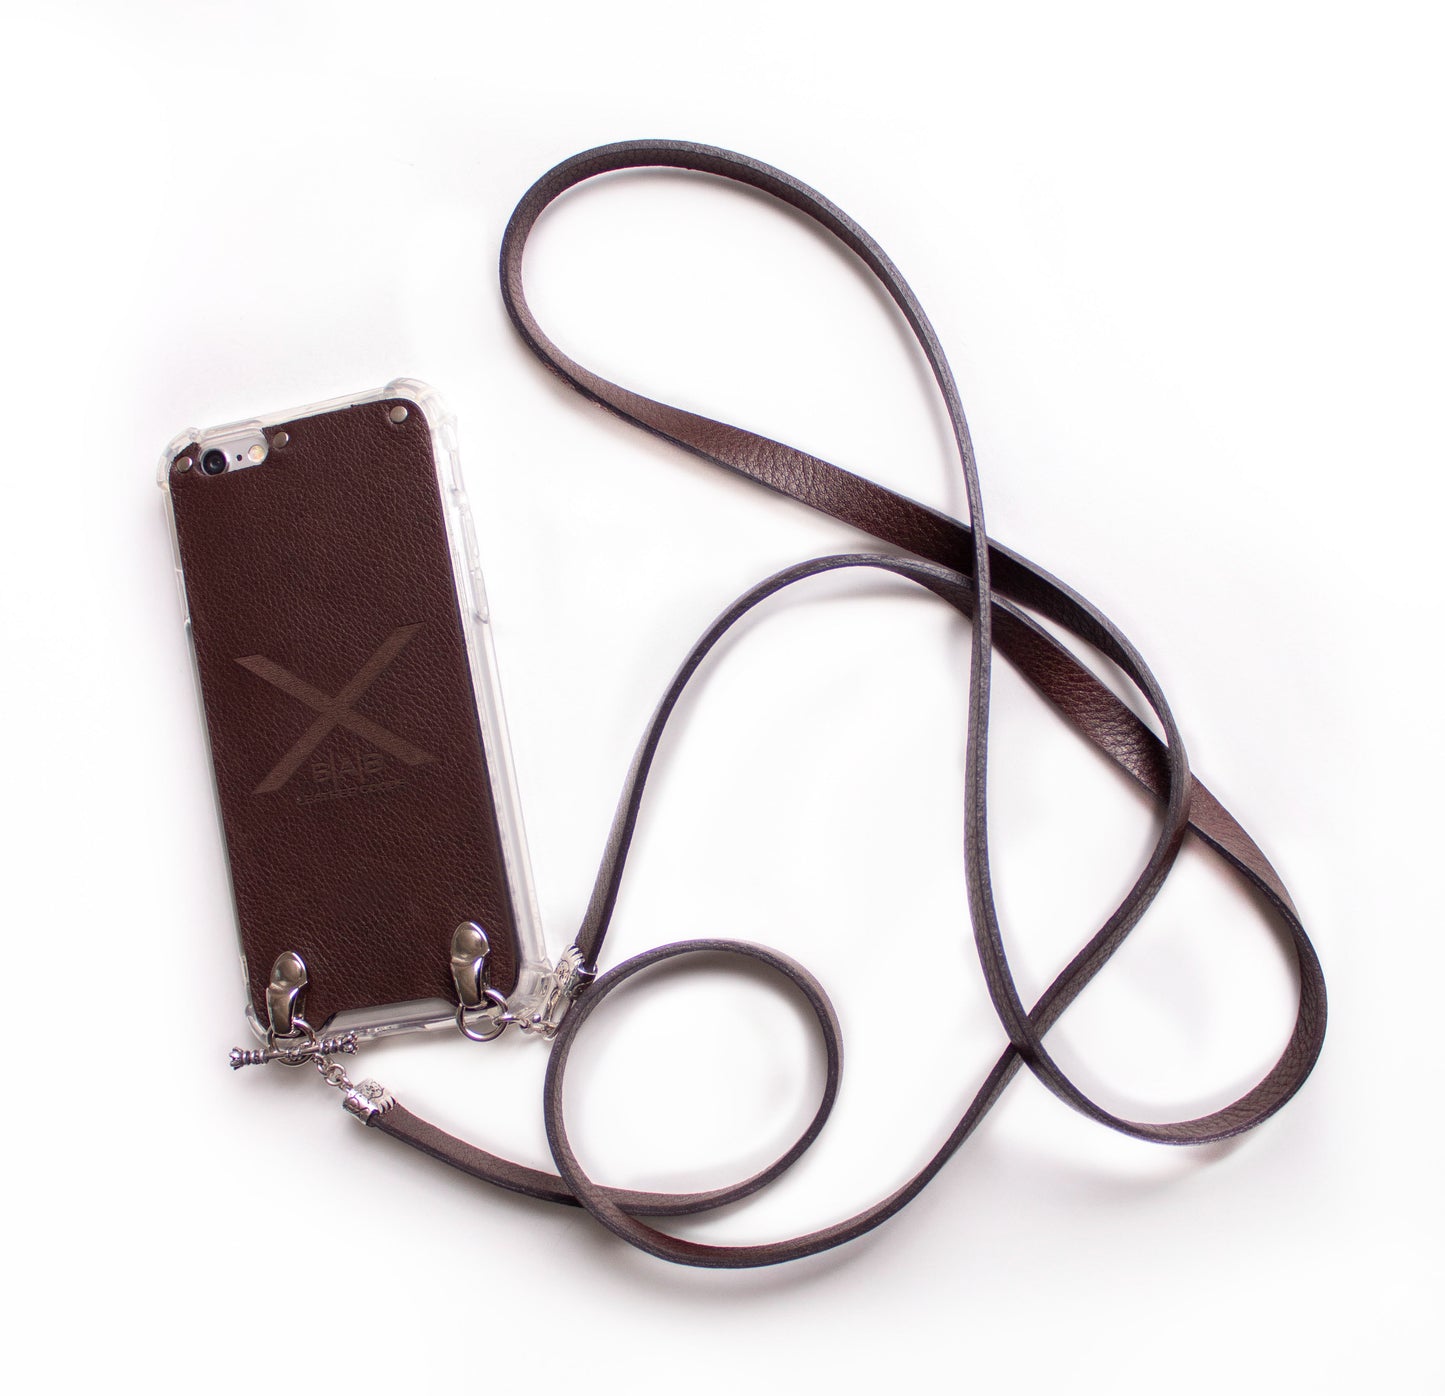 Full-Grain Genuine vegetable-tanned Leather & 925 Sterling Silver Case for iPhone. Double Full-Grain Genuine vegetable-tanned Leather Bracelet/Crossbody/Necklace, Blue, Brown, Black, or Red.- F05